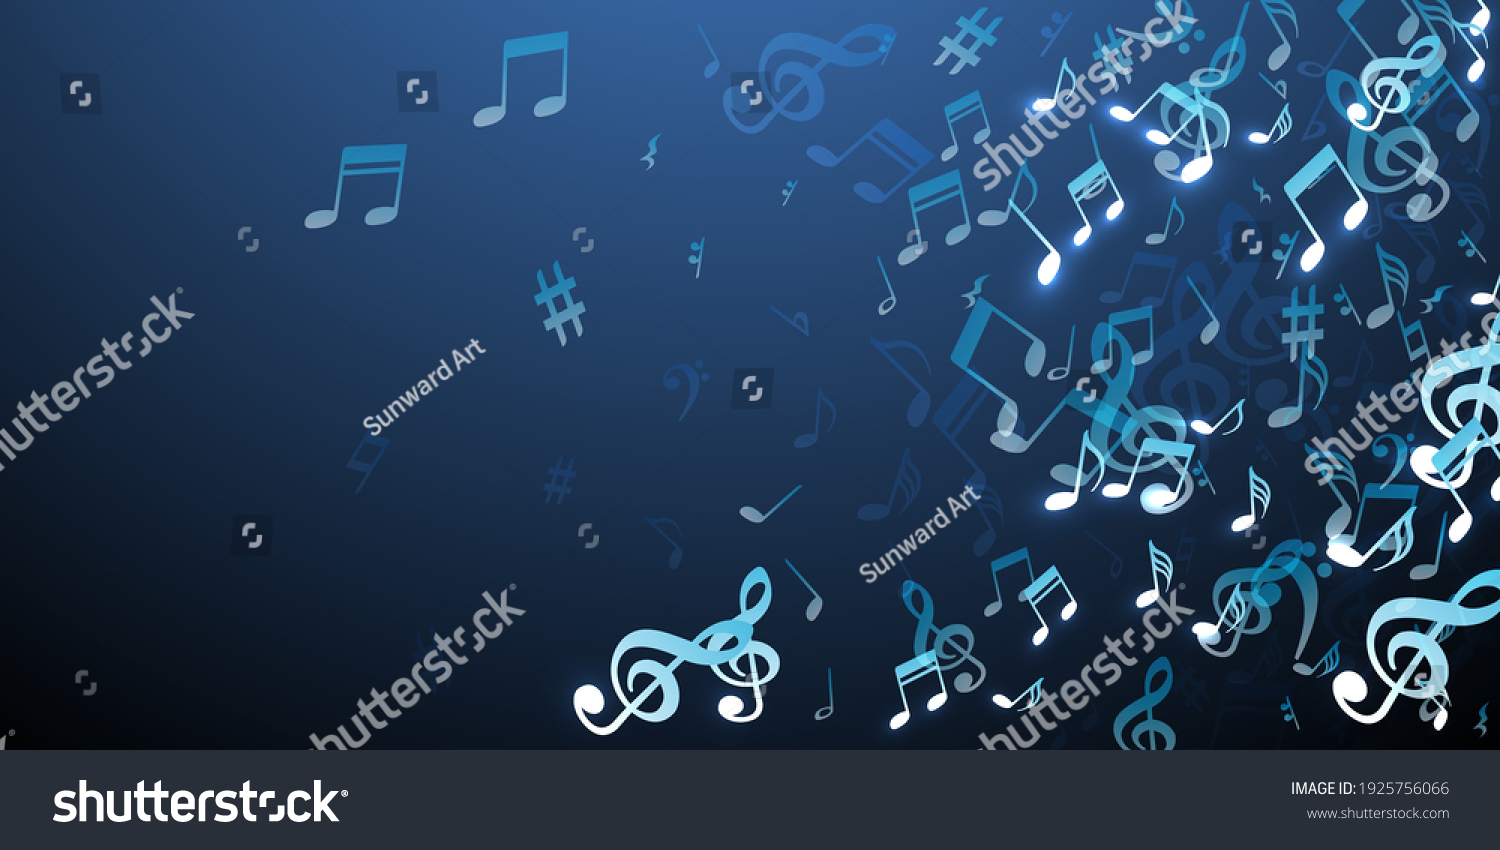 Music Note Icons Vector Wallpaper Audio Stock Vector (Royalty Free ...